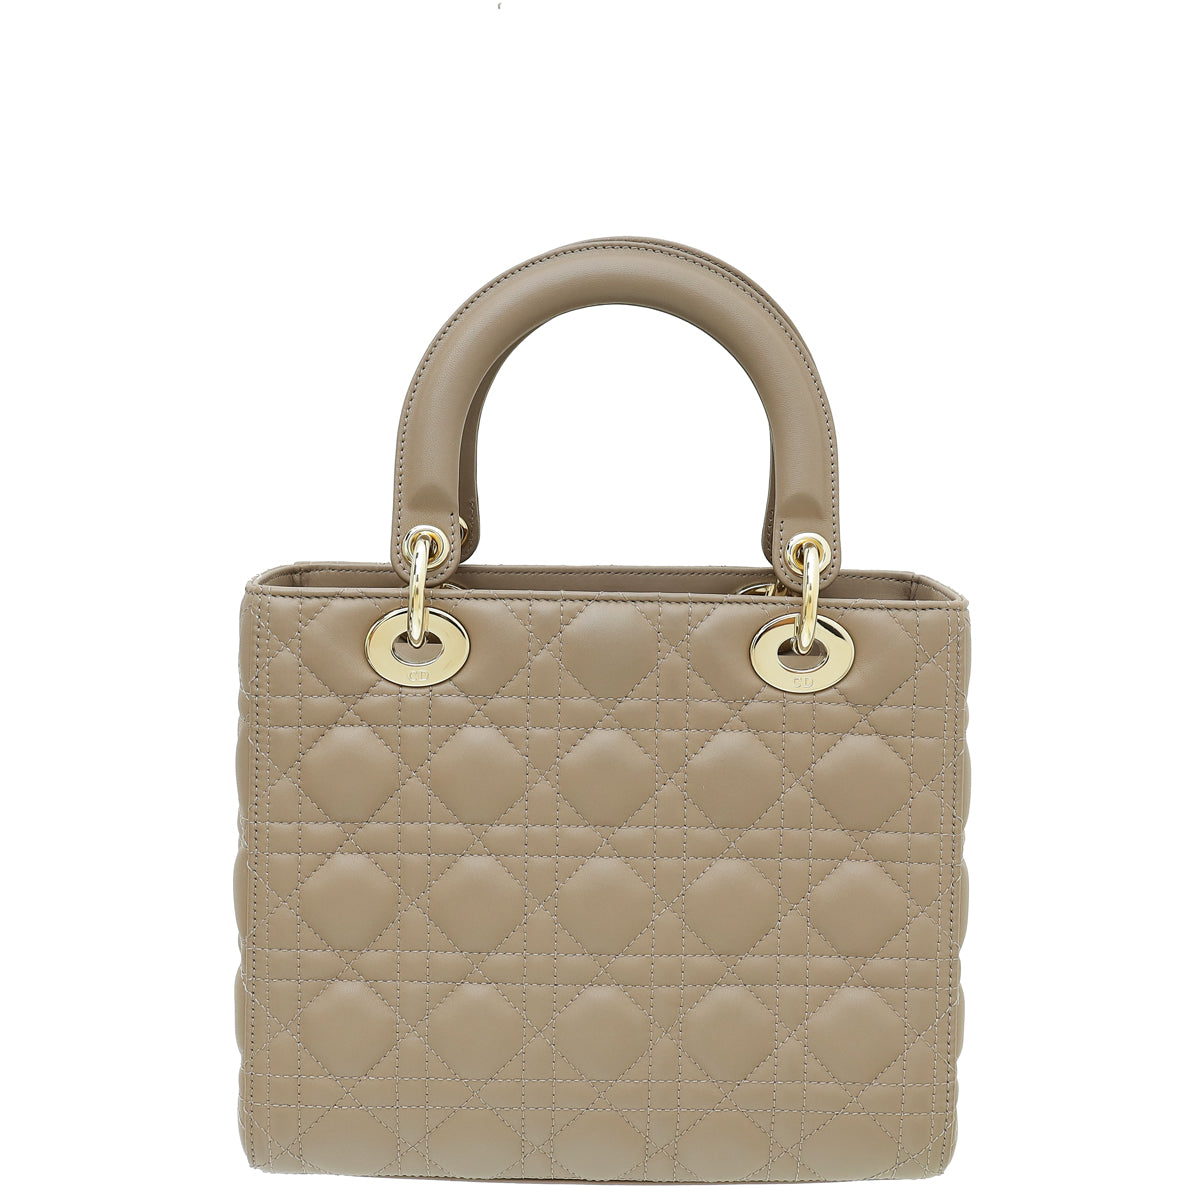 Load image into Gallery viewer, Christian Dior Warm Taupe Lady Dior Medium Bag
